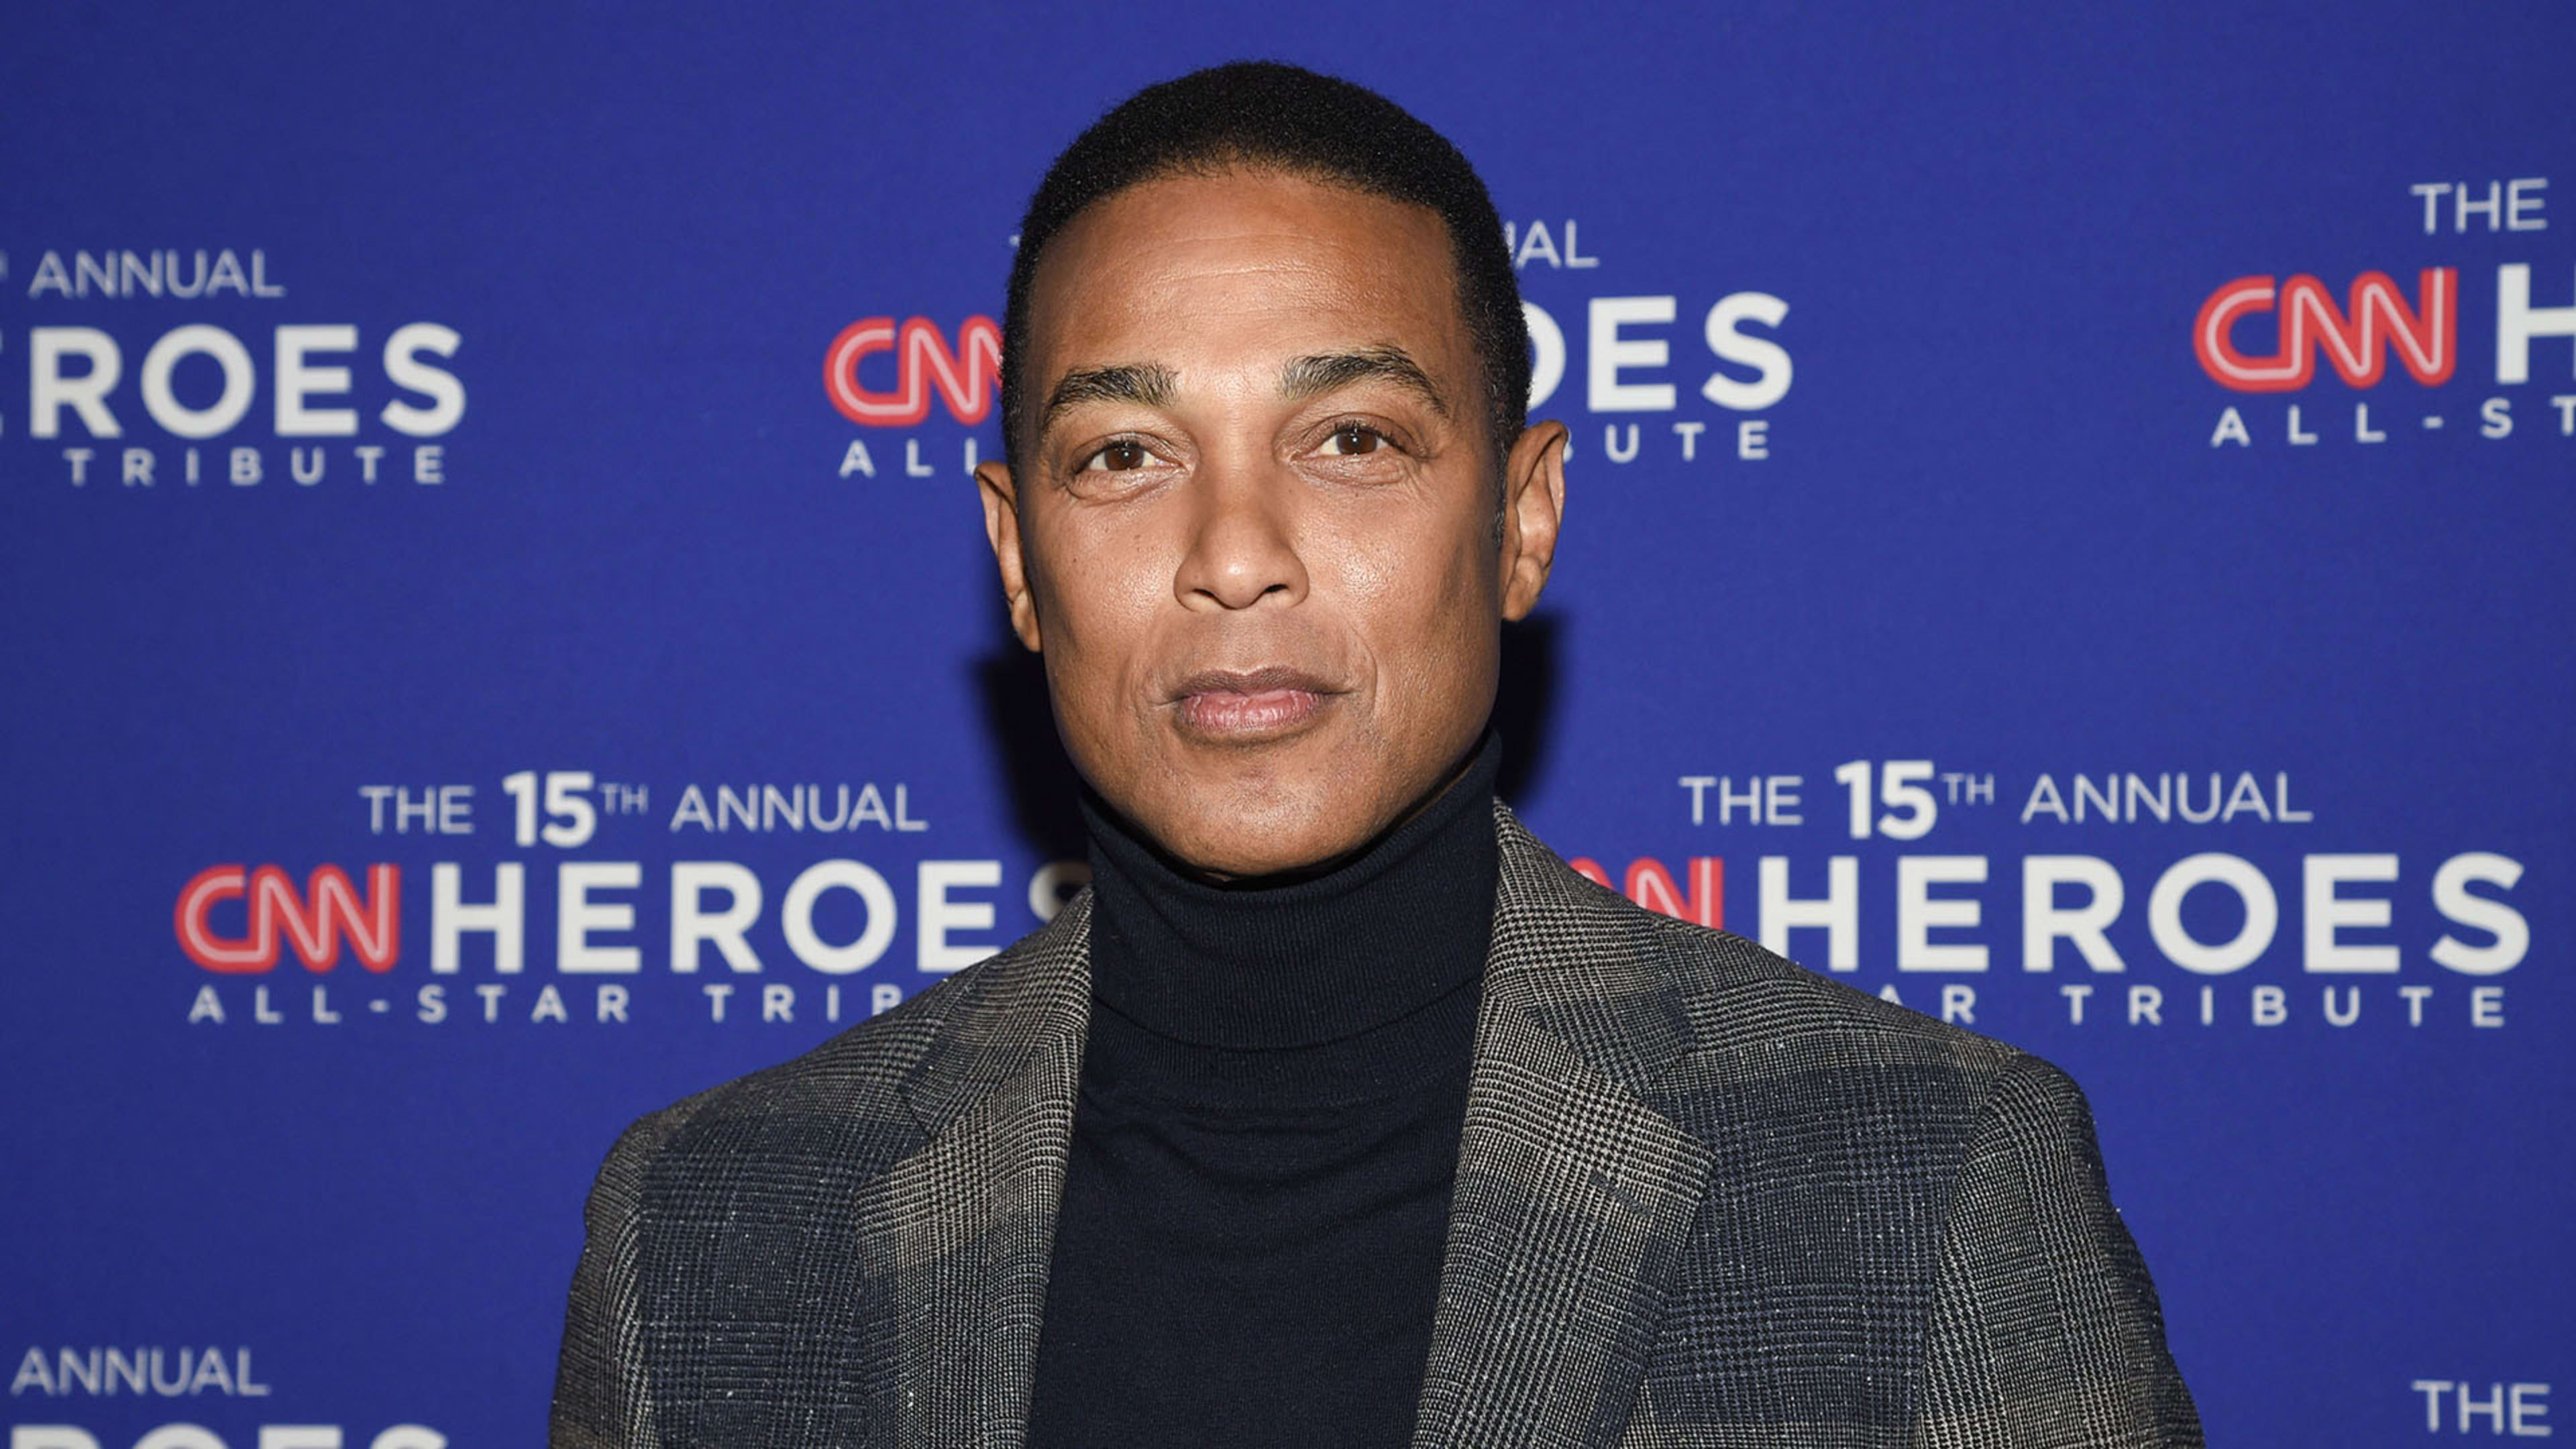 From ketamine to Trump, takeaways from Don Lemon’s interview with Elon Musk